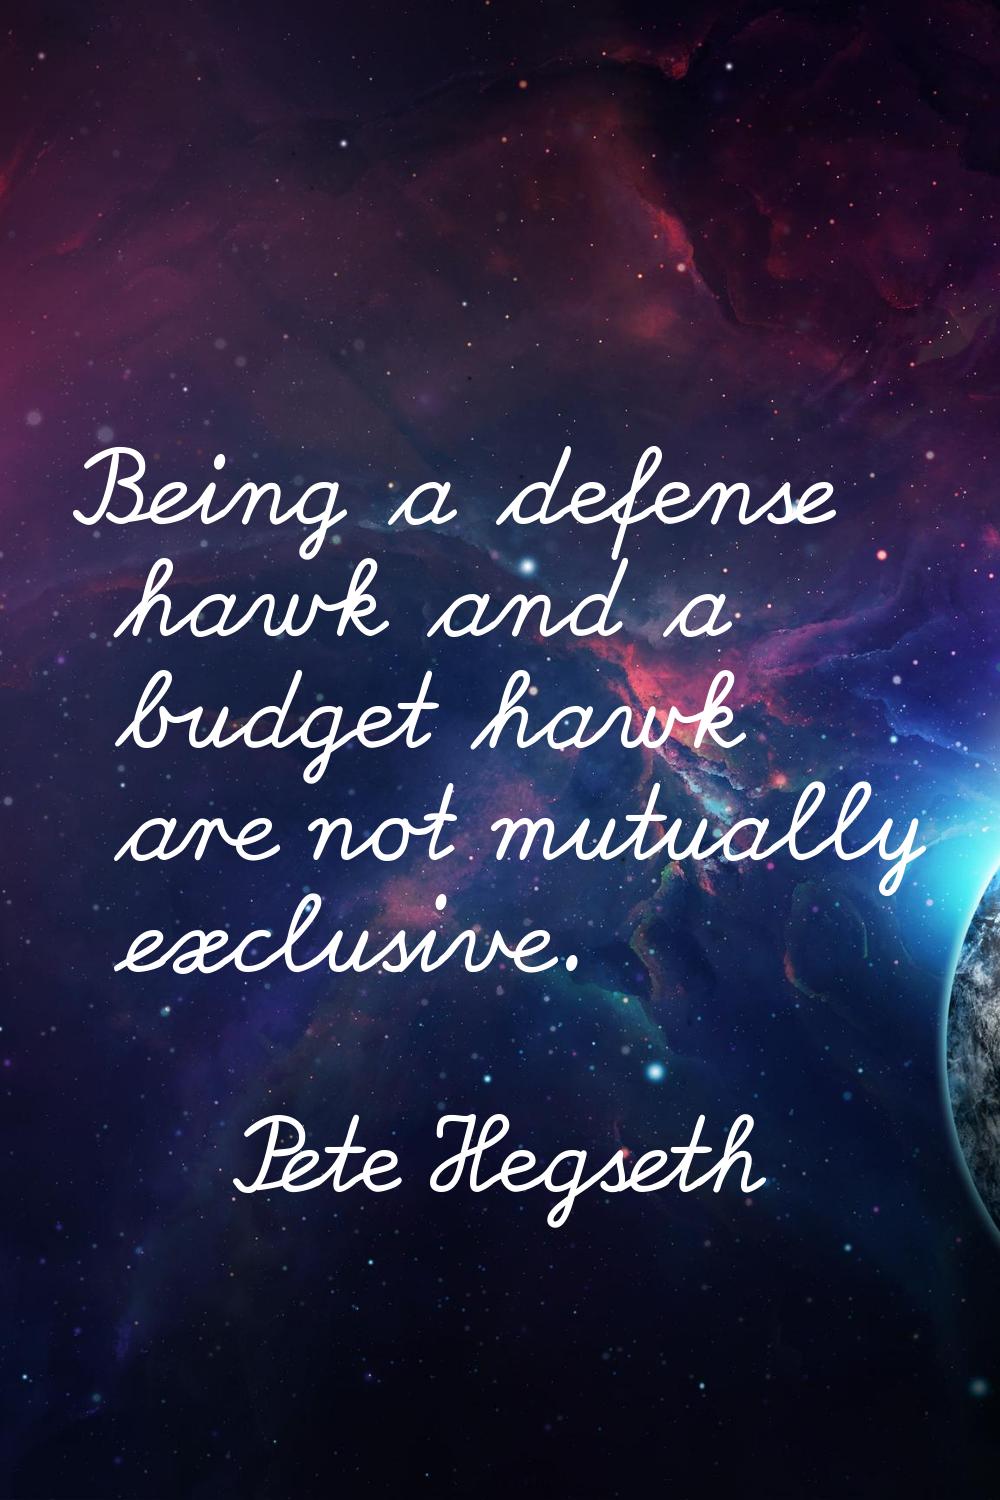 Being a defense hawk and a budget hawk are not mutually exclusive.